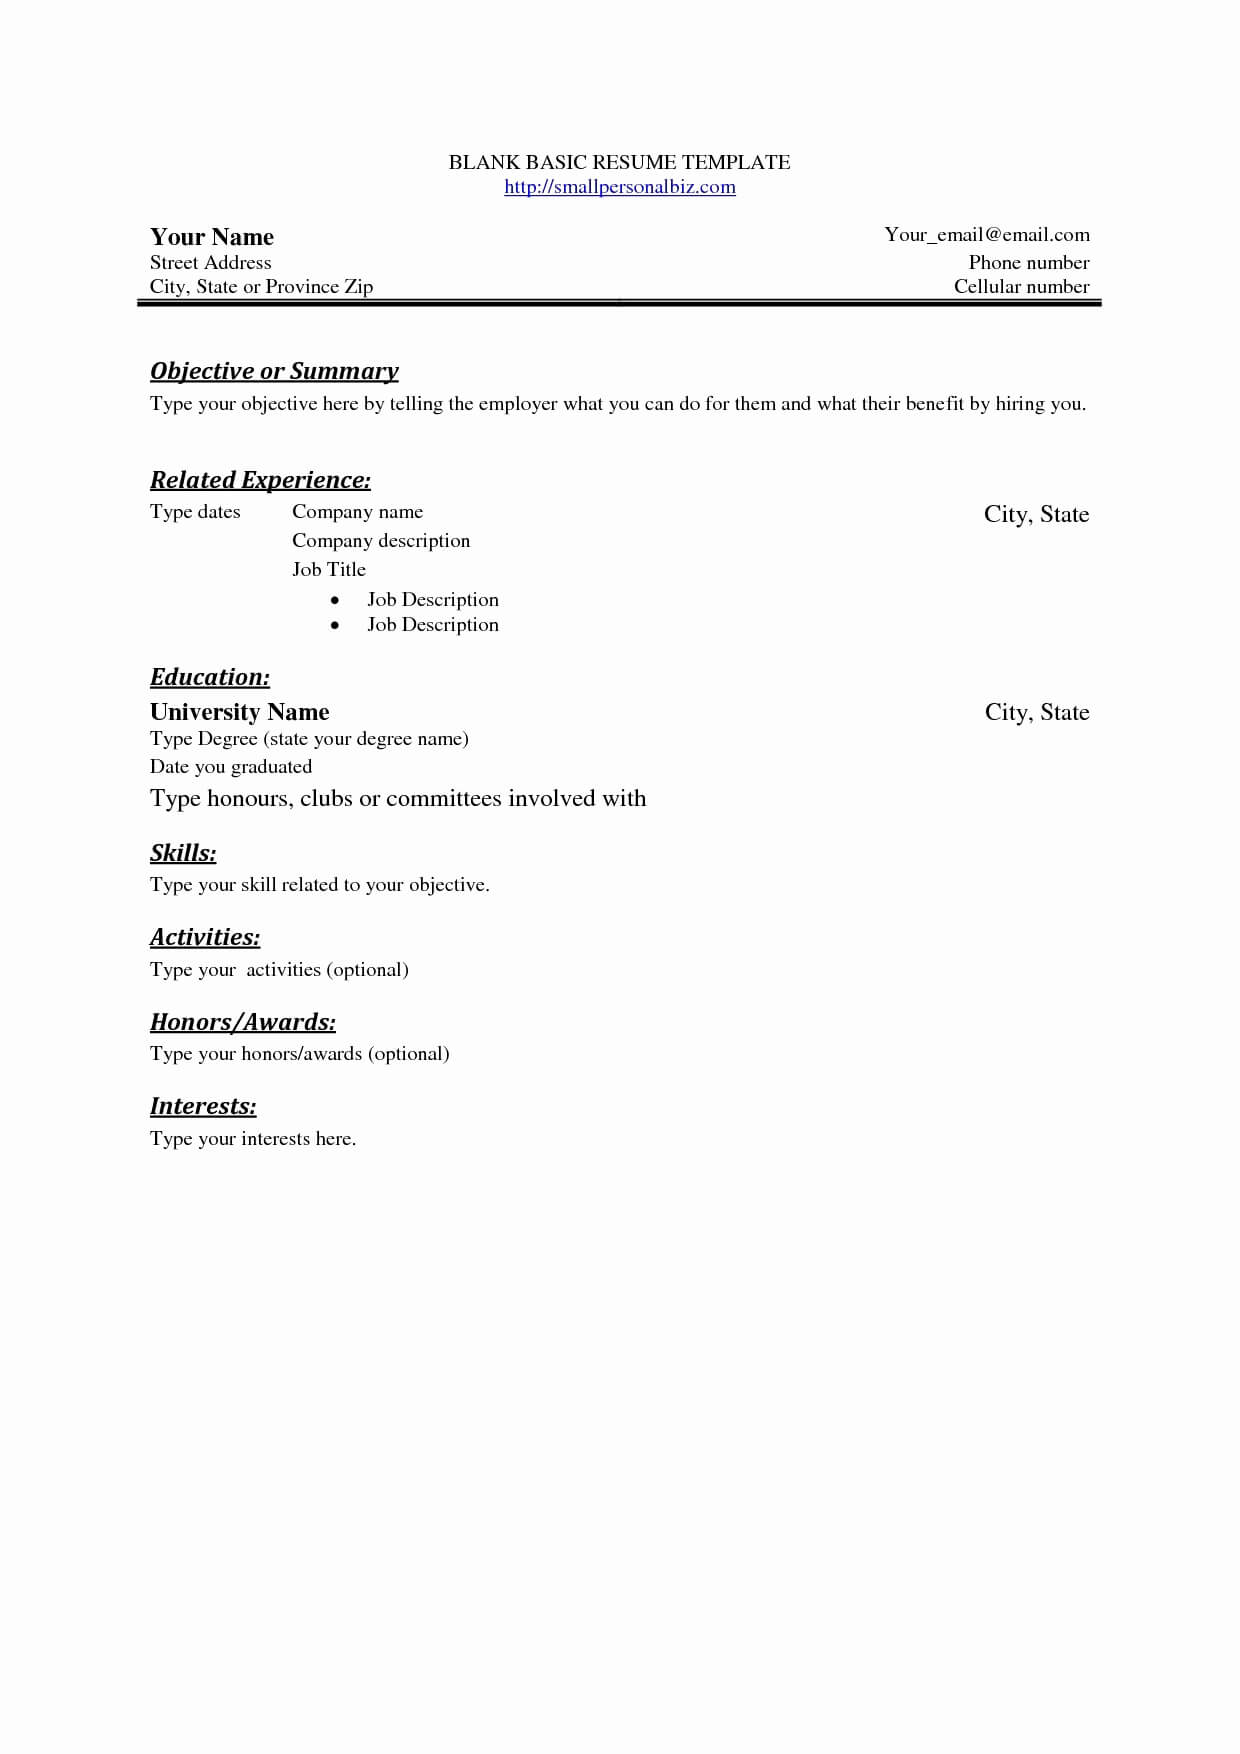 Easy Resume Template Free Cover Letter Templates For Free Blank Resume Templates For Microsoft Word